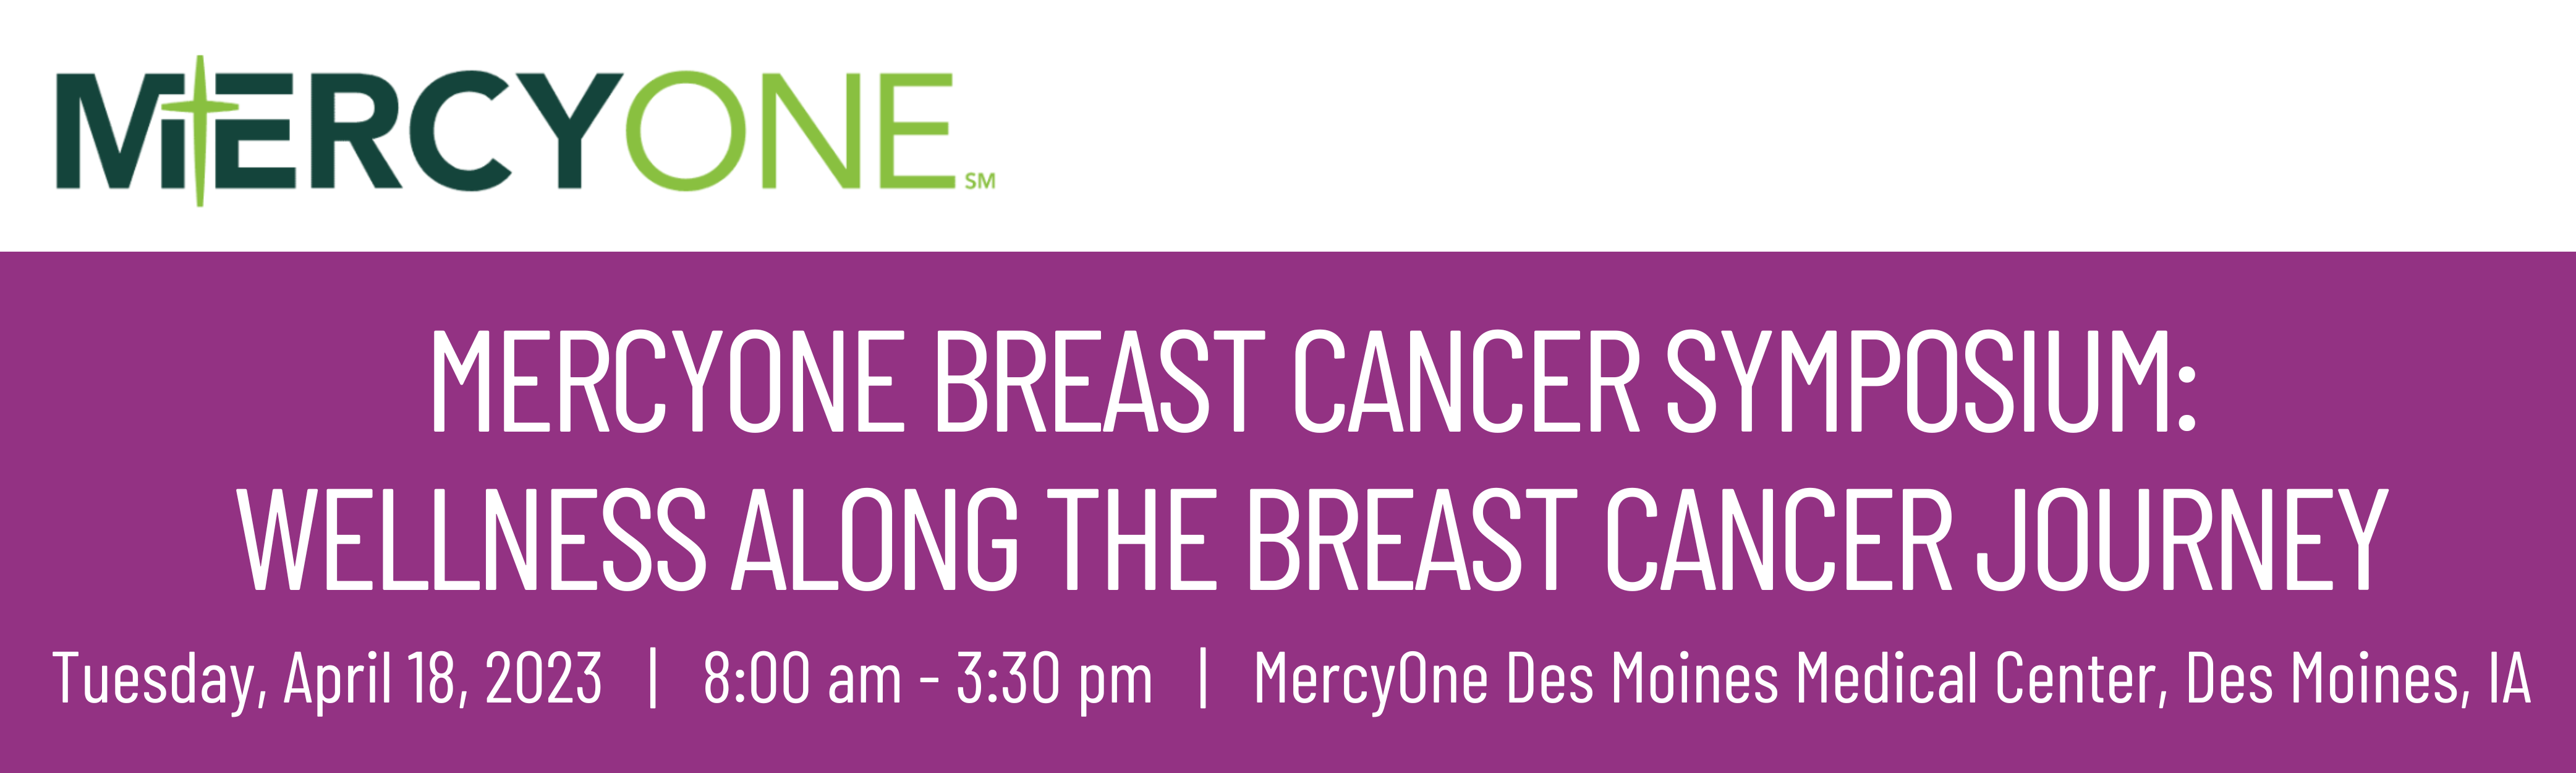 MercyOne Breast Cancer Symposium: Wellness Along the Breast Cancer